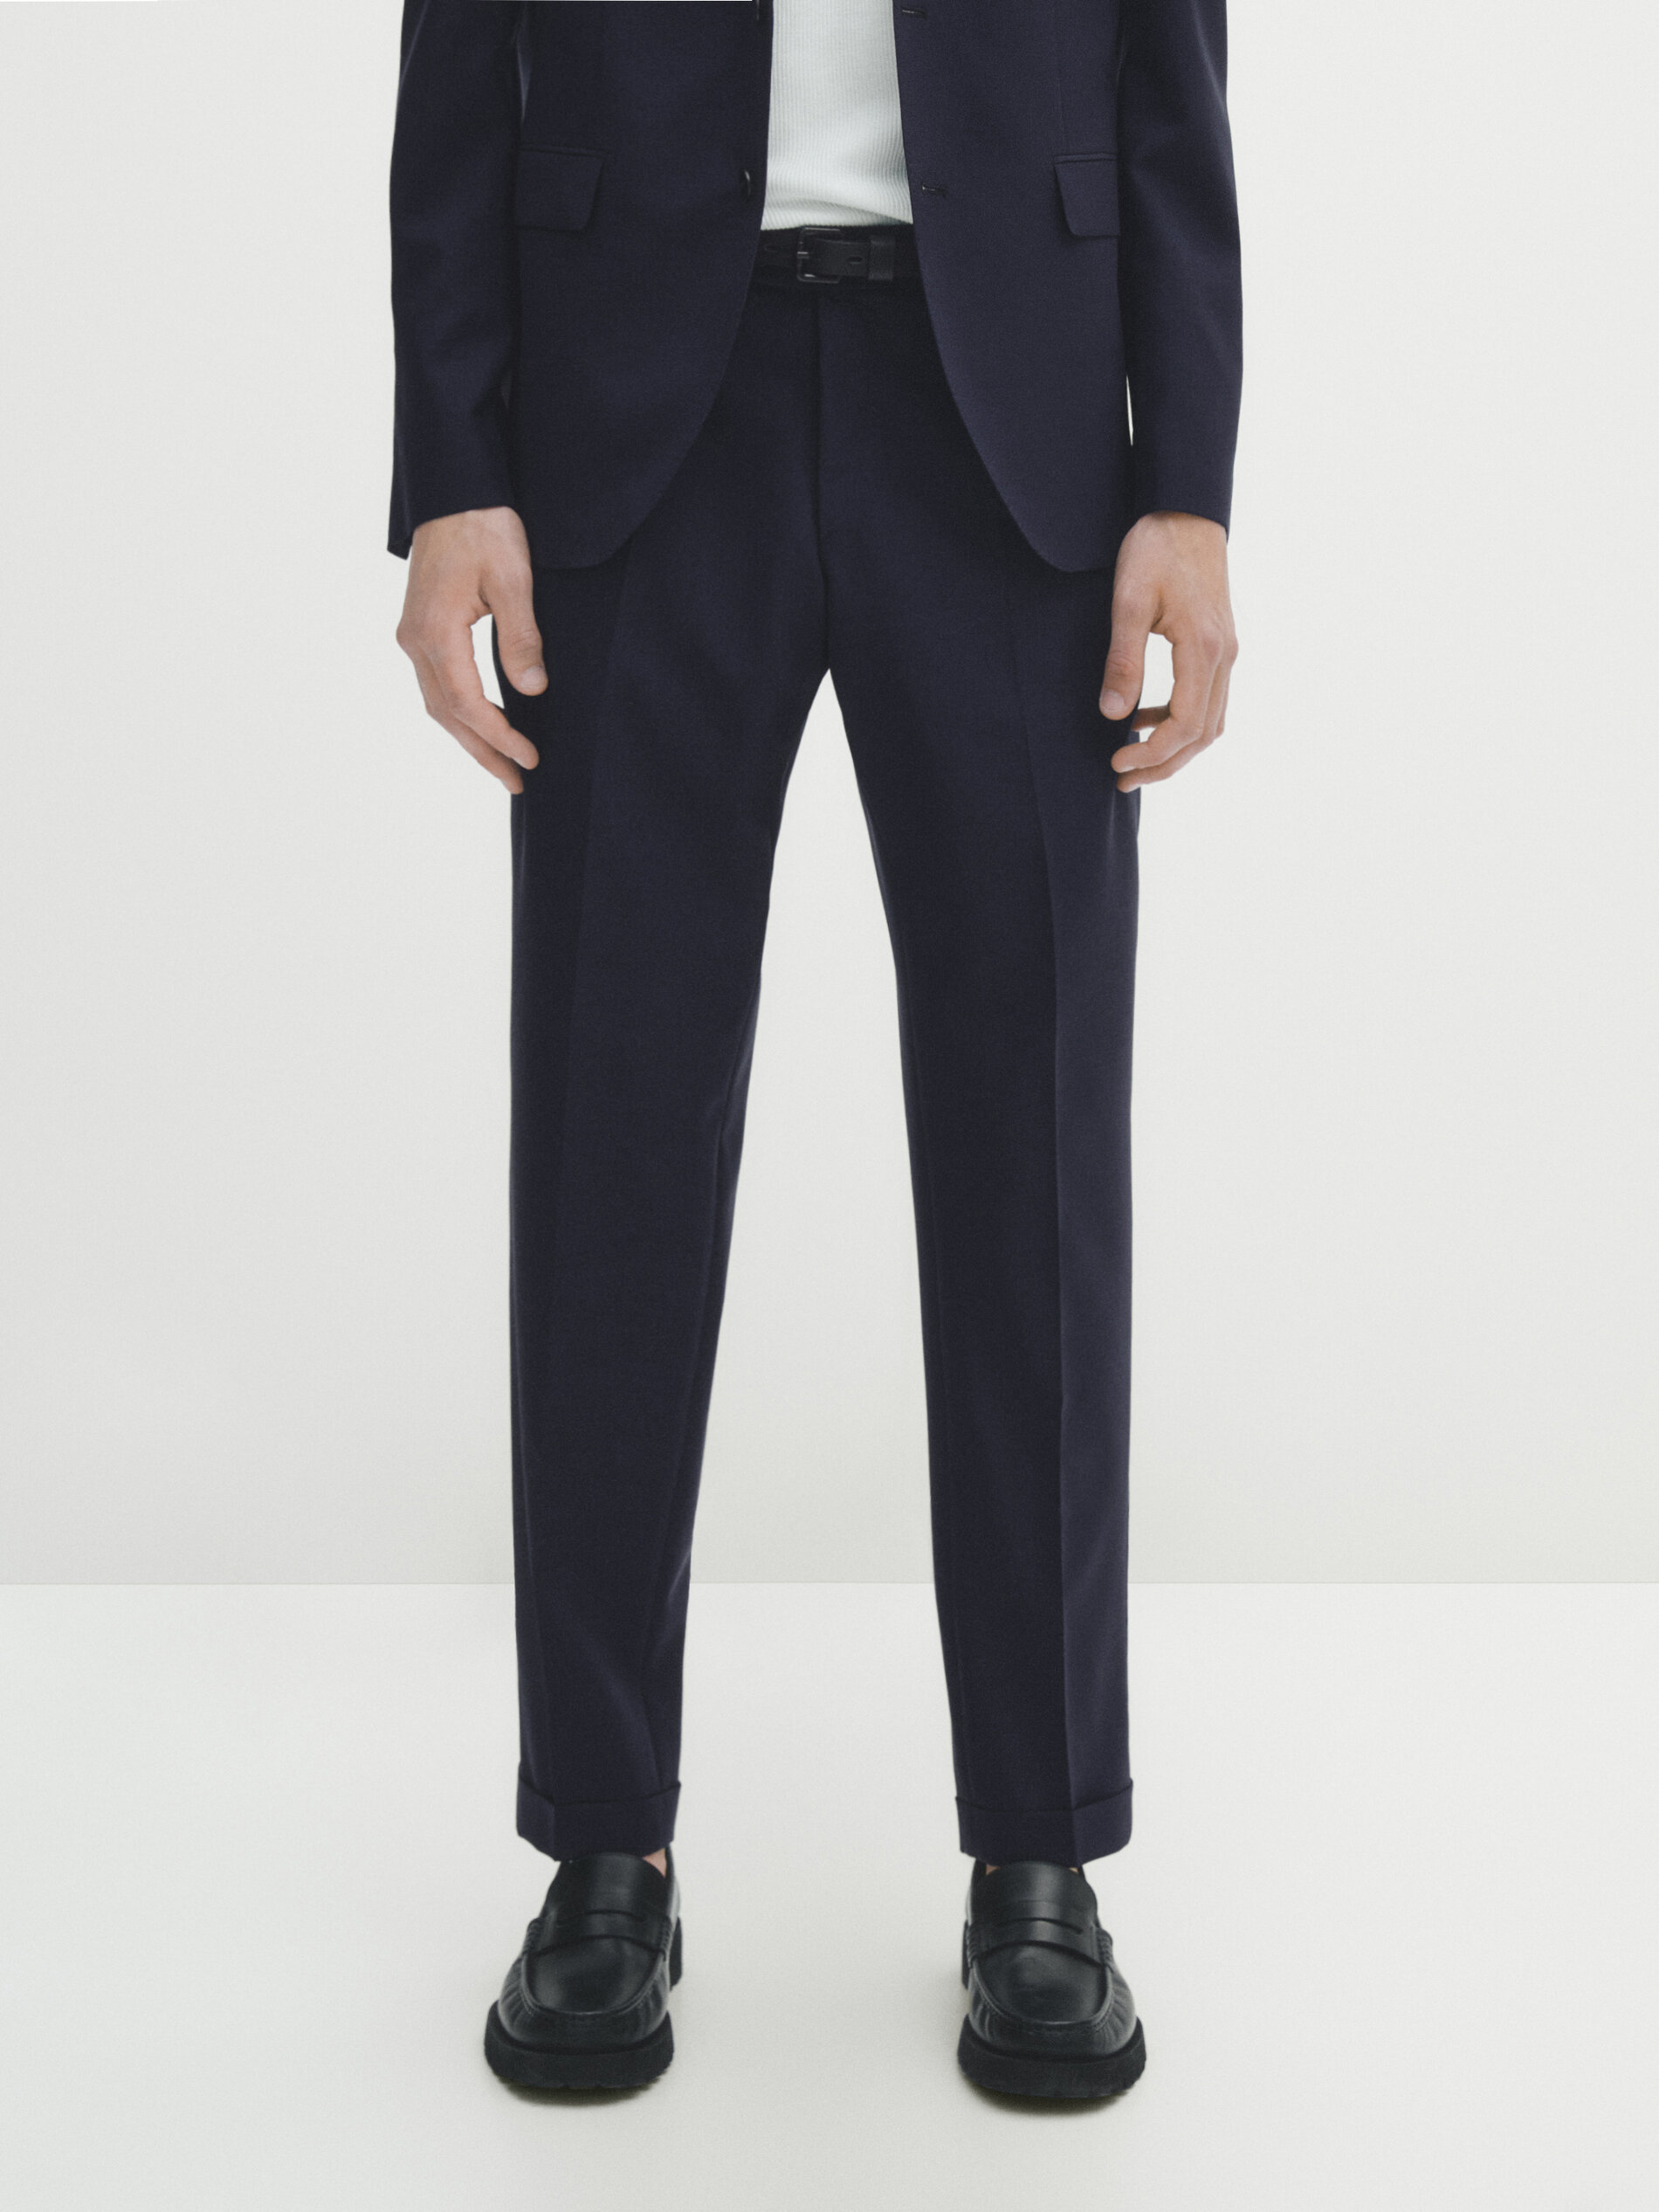 100 WOOL SUIT TROUSERS  Navy blue  ZARA India